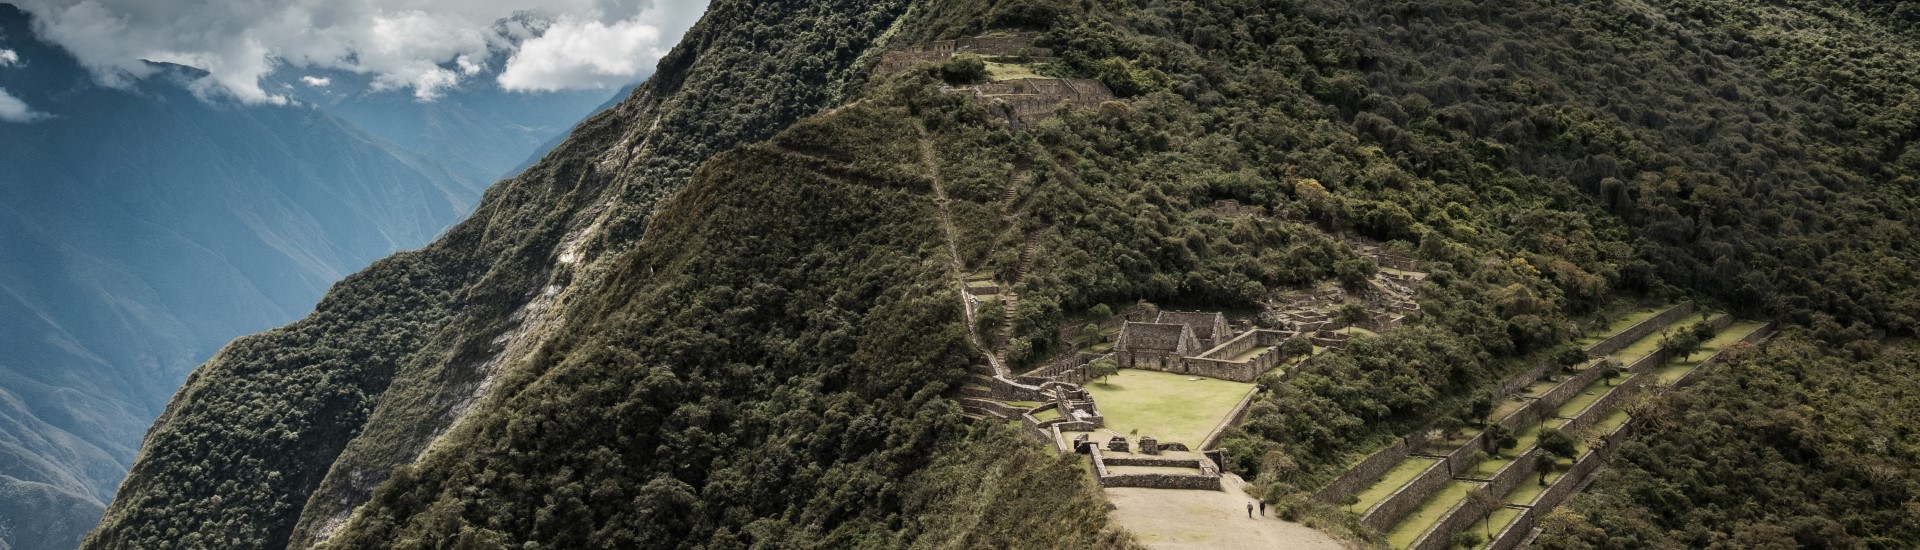 Cusco, Peru - Aerial view of the Archaeological Site of Choquequirao